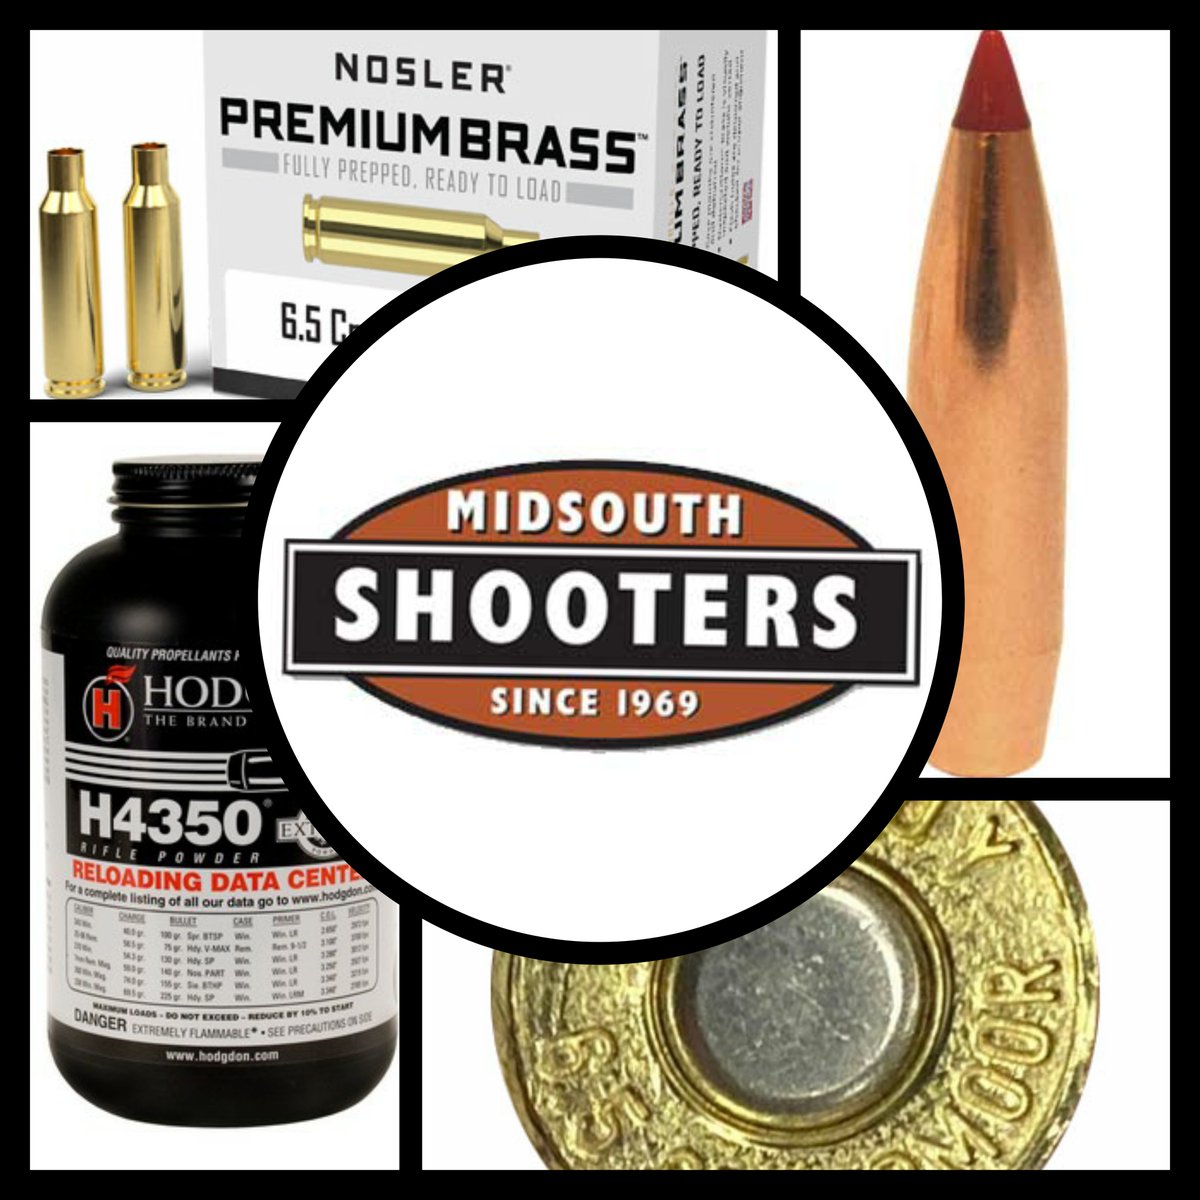 Celebrate 6/5 with your favorite cartridges and components! We all love the #65creedmoor - but what are your other favorite 6.5mm caliber cartridges? #loadyourown #midsouthshooters #sixfivecreedmoor #sixfivemm #2a #reload #ammunition